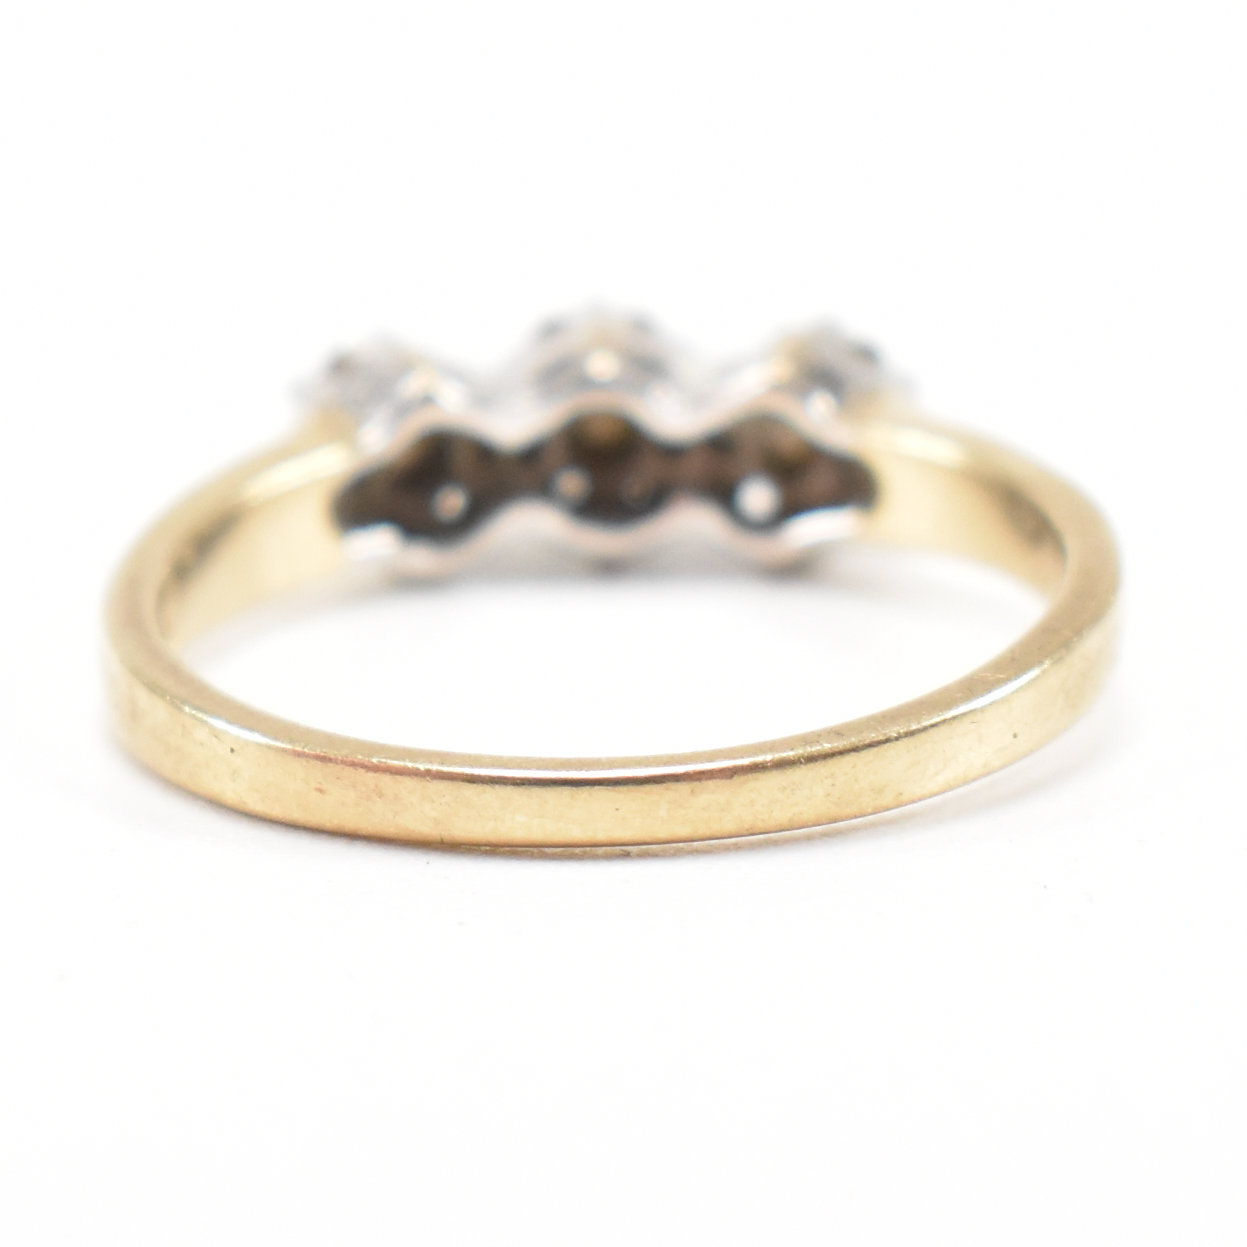 HALLMARKED 9CT GOLD & DIAMOND CLUSTER RING - Image 6 of 8